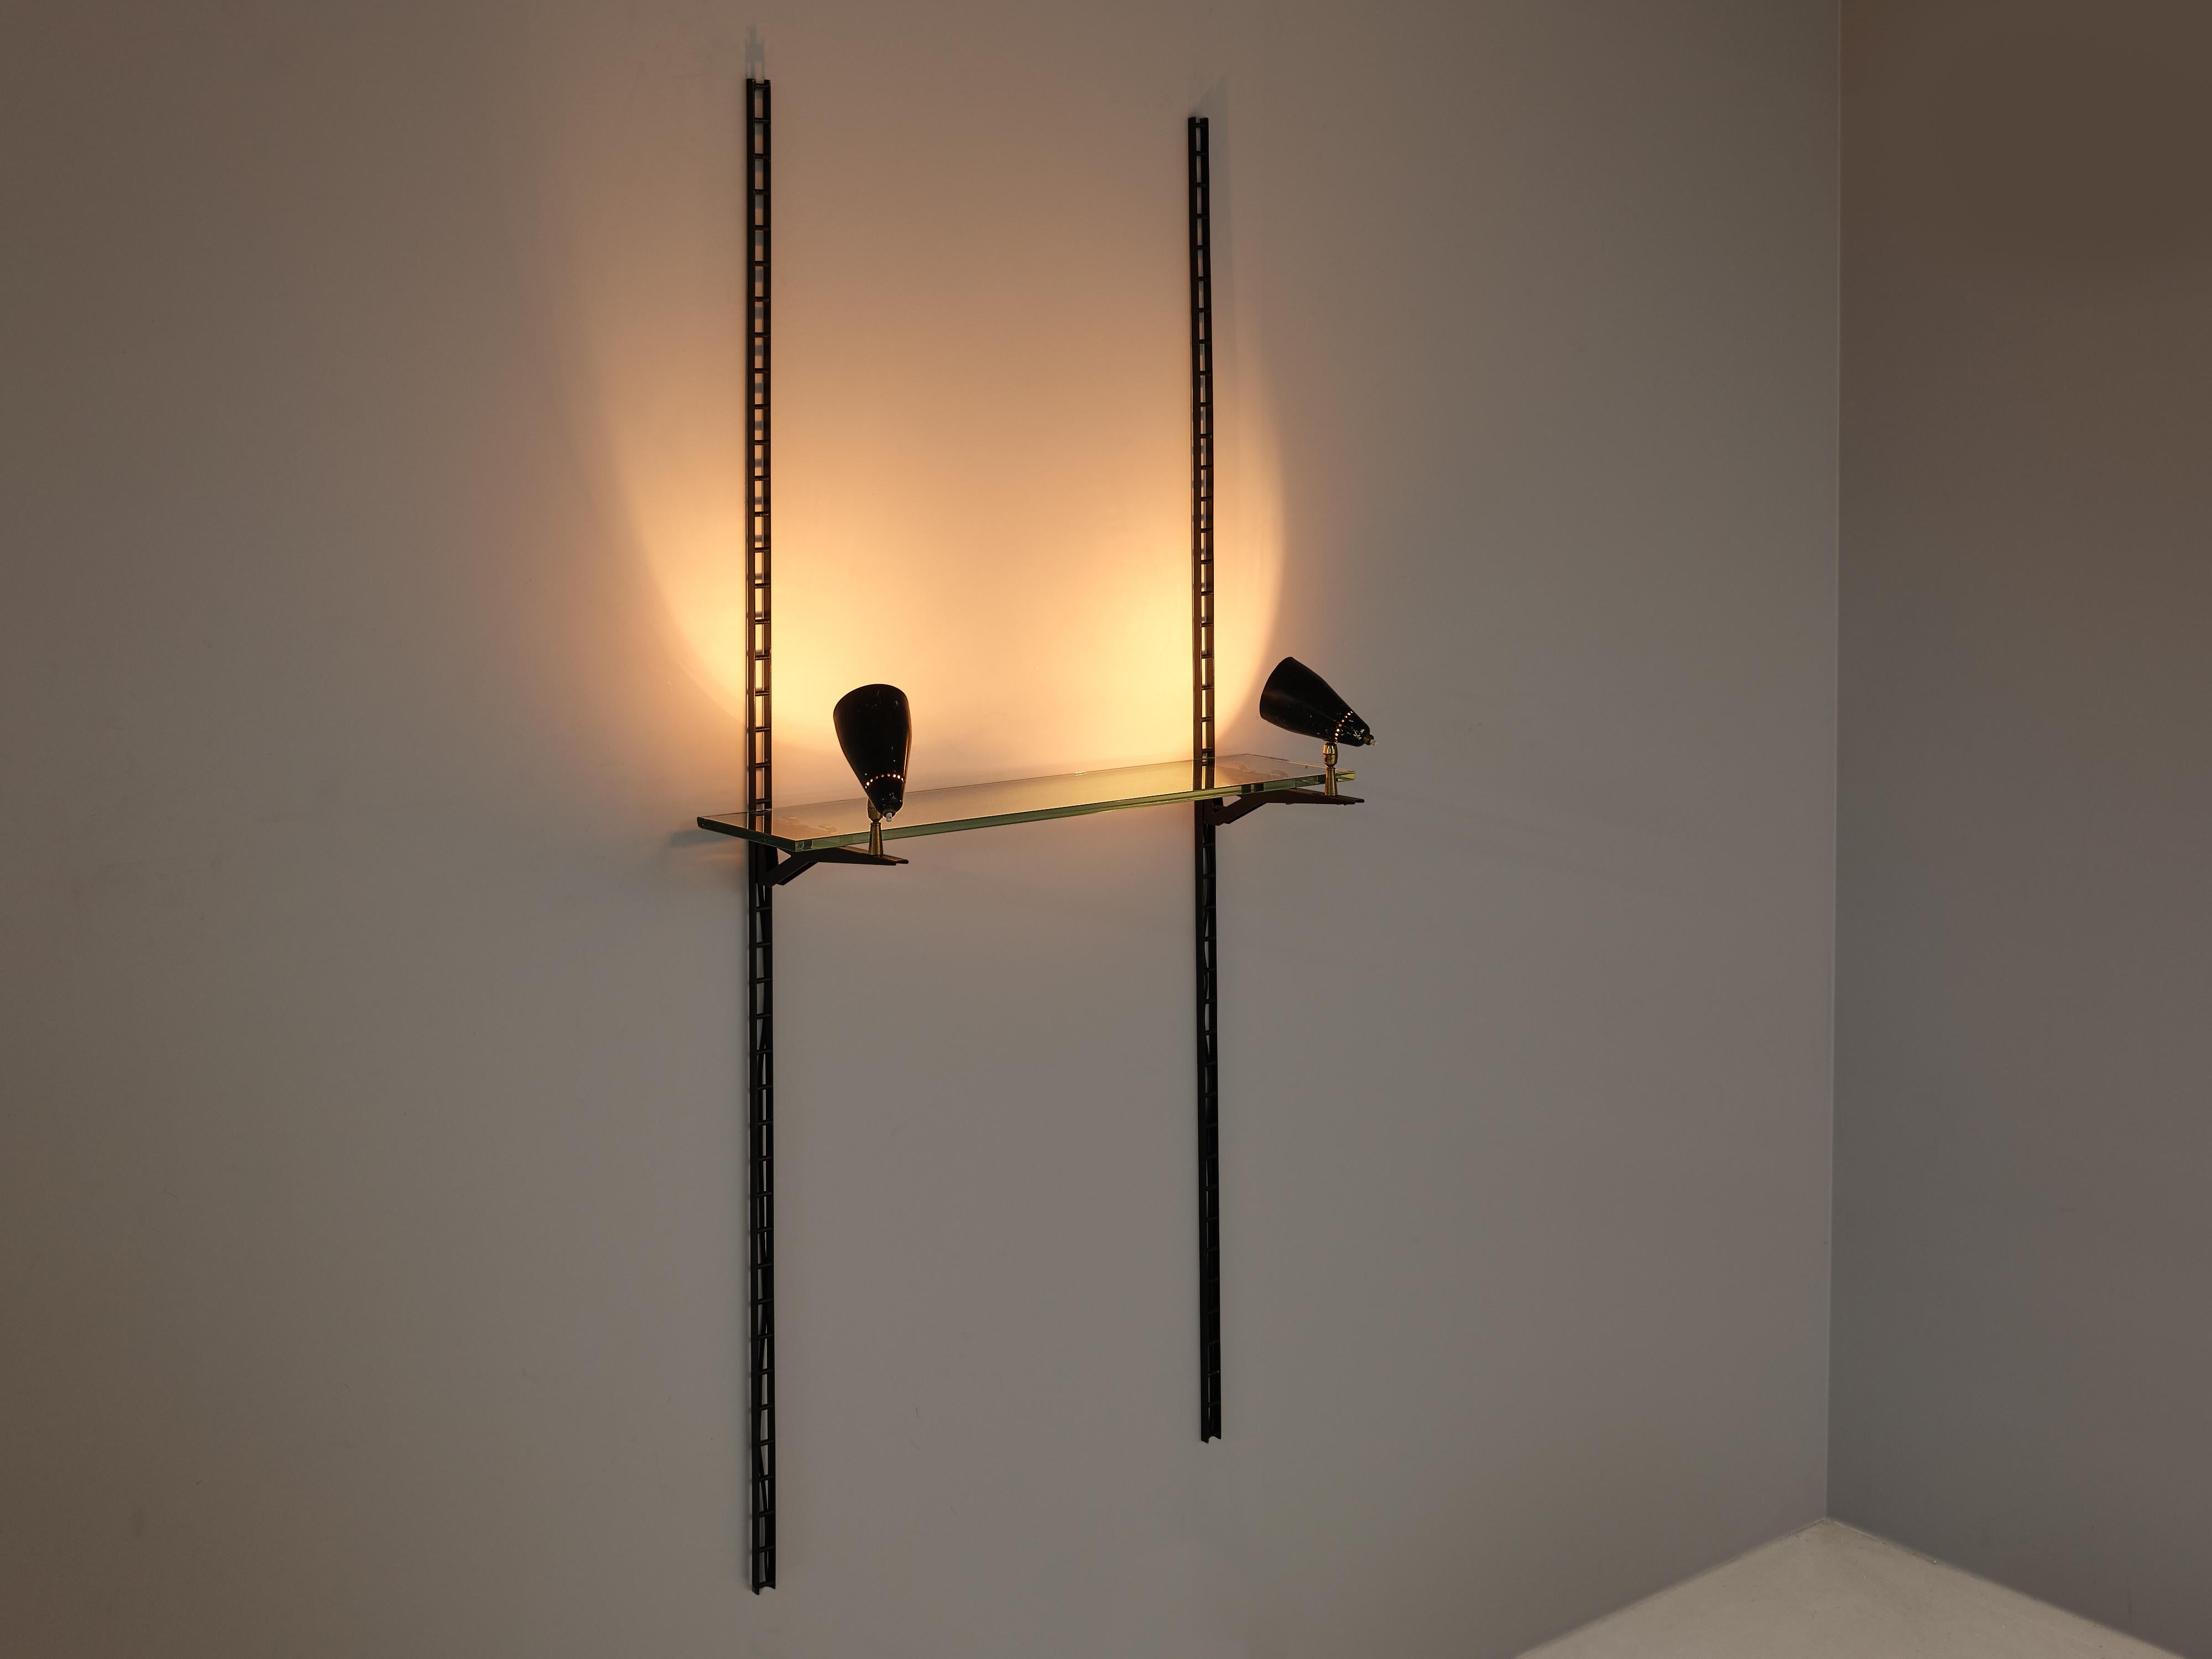 Gino Sarfatti for Arteluce, display console, metal, glass, brass, Italy, 1970s

Two vertical wall mounts in black metal hold a glass shelf. At the end of the fixtures two adjustable lamps are arranged to light up the items you want to showcase. The